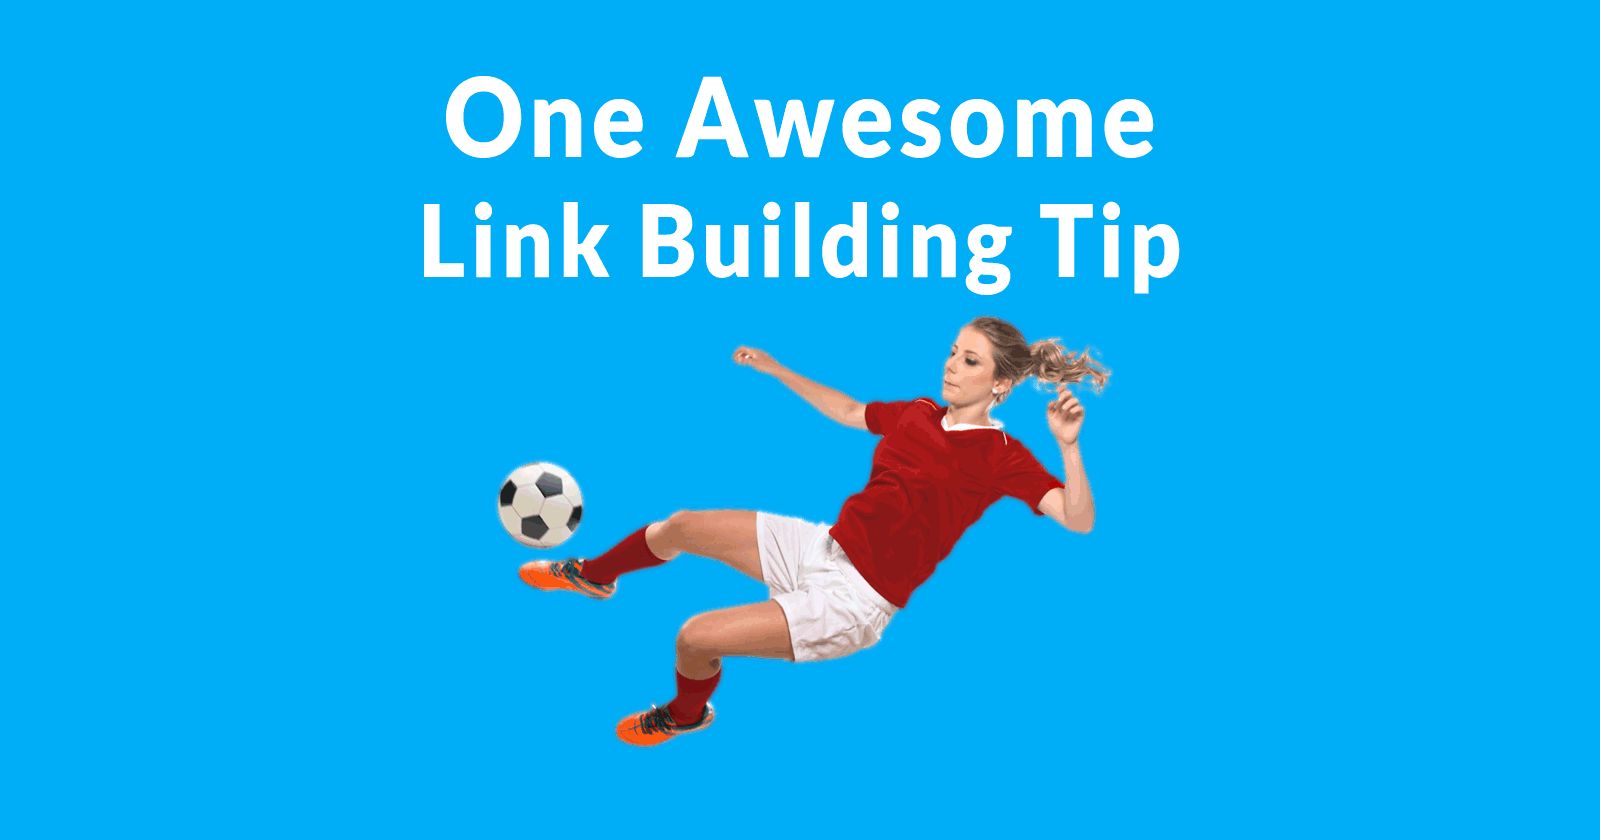 One awesome link building tip